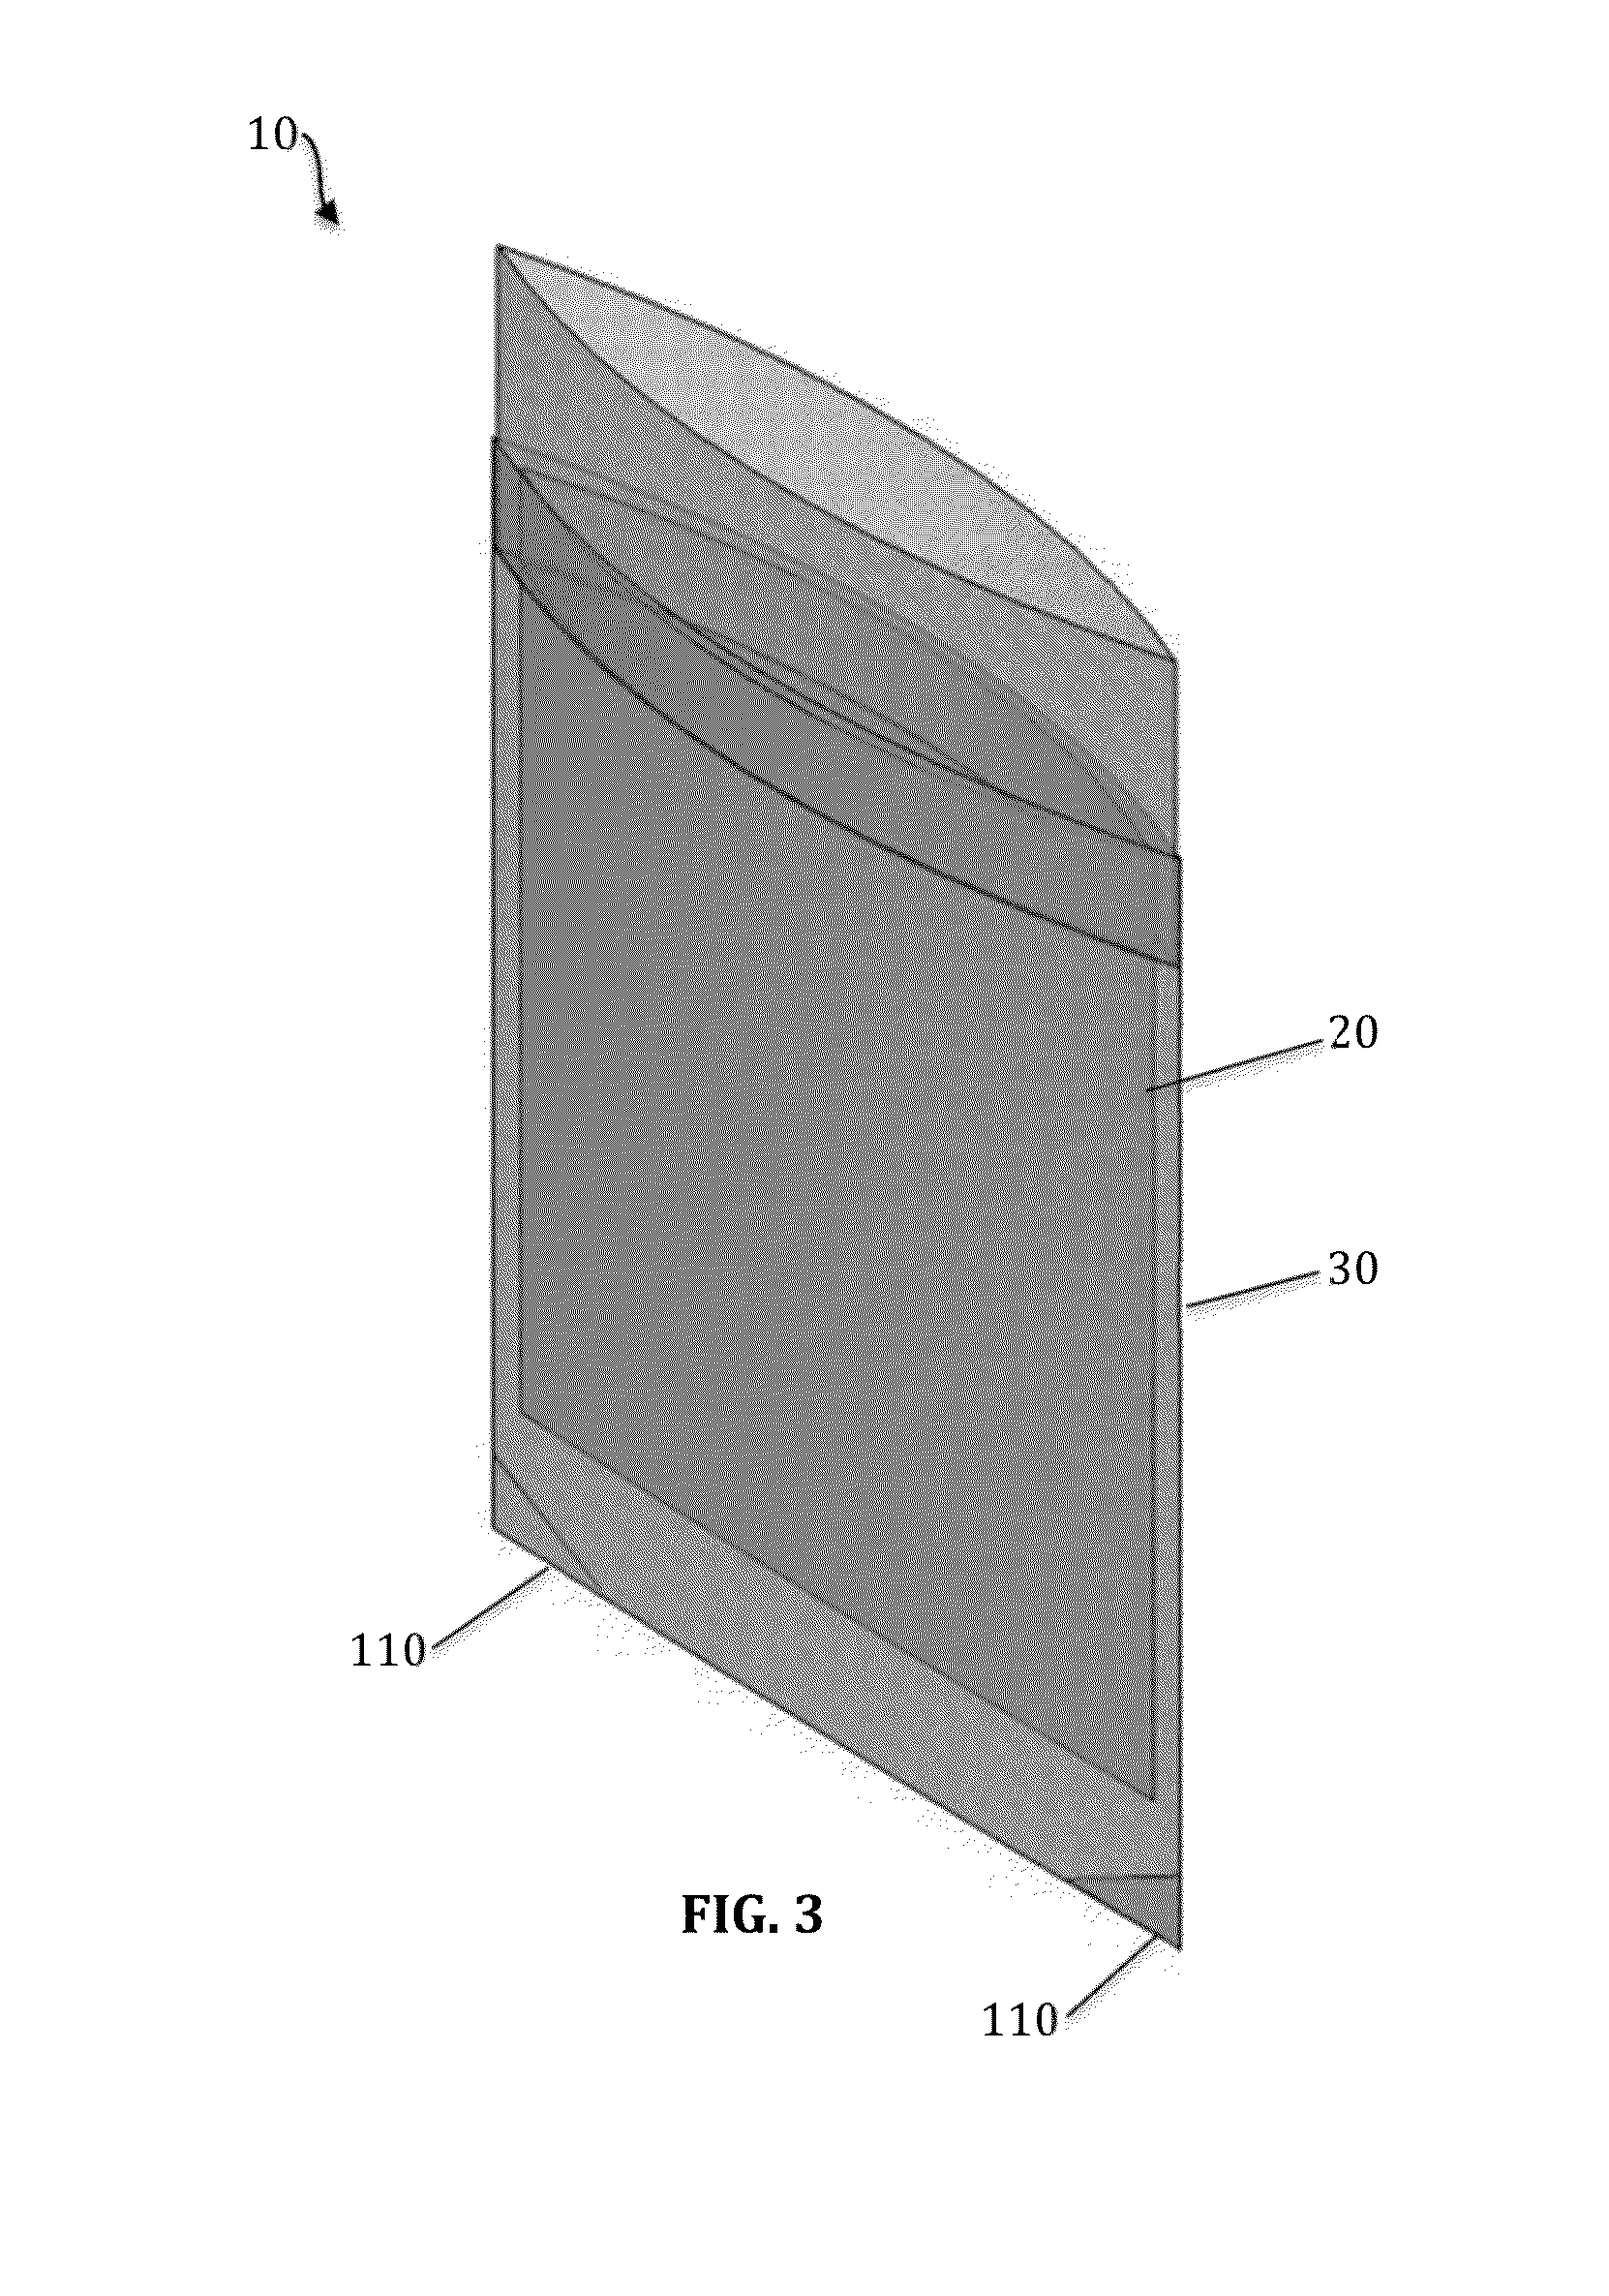 Dual Sterile Pouch and Sealing Mechanisms for the Containment of a Non-Sterile Device